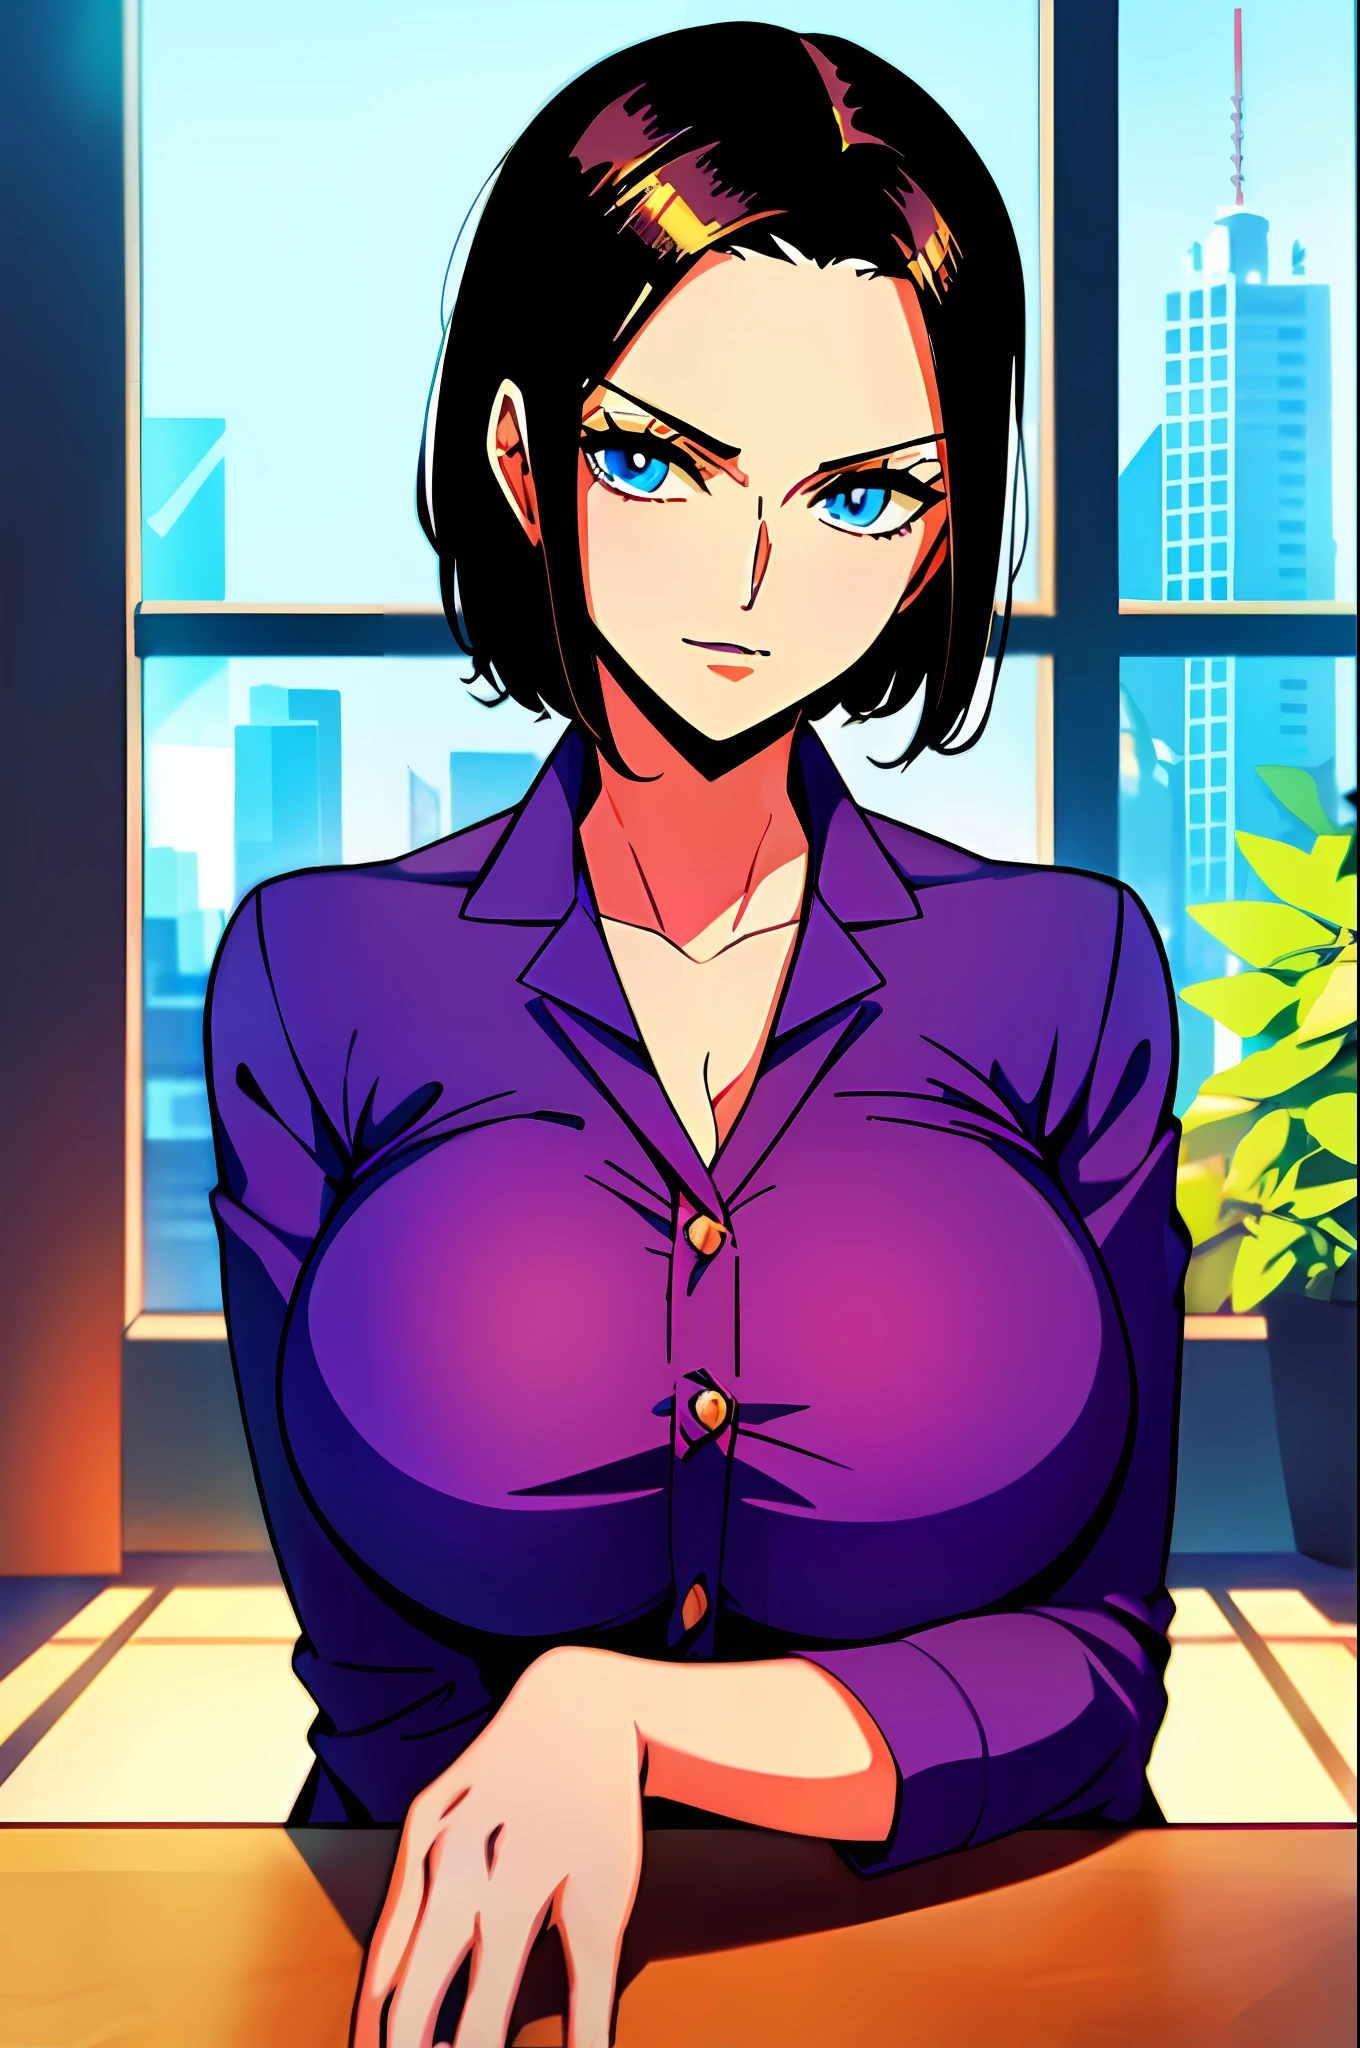 1girl (Masterpiece: 1.2) (Details: 1.2) (Best Quality: 1.1) (Glossy Hair) (Glossy Skin), Nico Robin V2, Cinematic Lighting, Girl of about 20 years old, Short hair, Office lady, Purple suit, Wearing glasses, Big breasts, Secretary-like woman, Black hair, Blue eyes, Beautiful eyes,